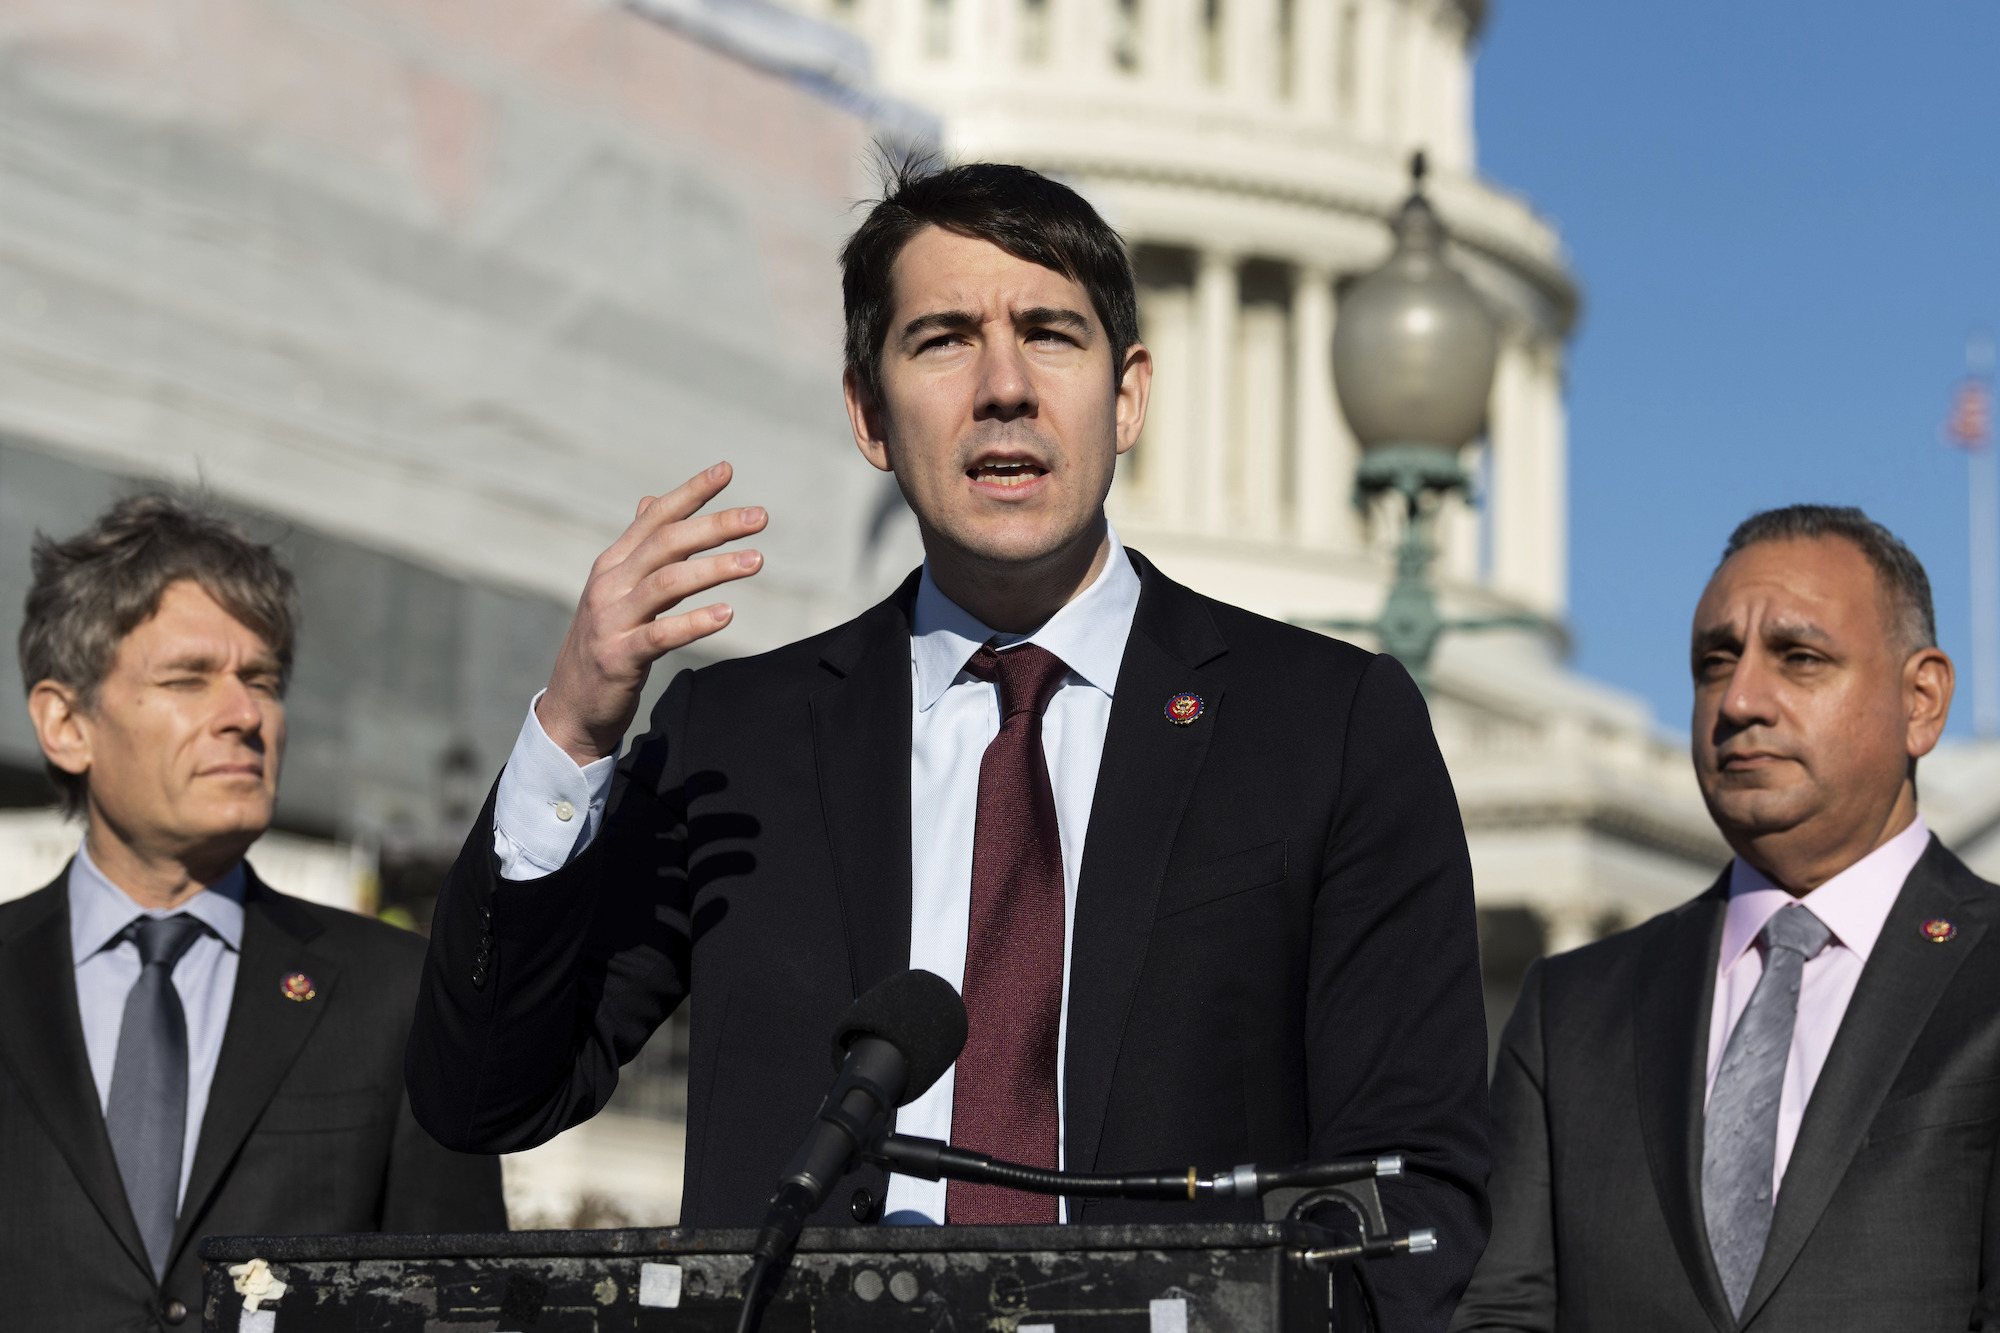 Rep. Josh Harder speaking at an event in Washington, DC, on January 16, 2020.